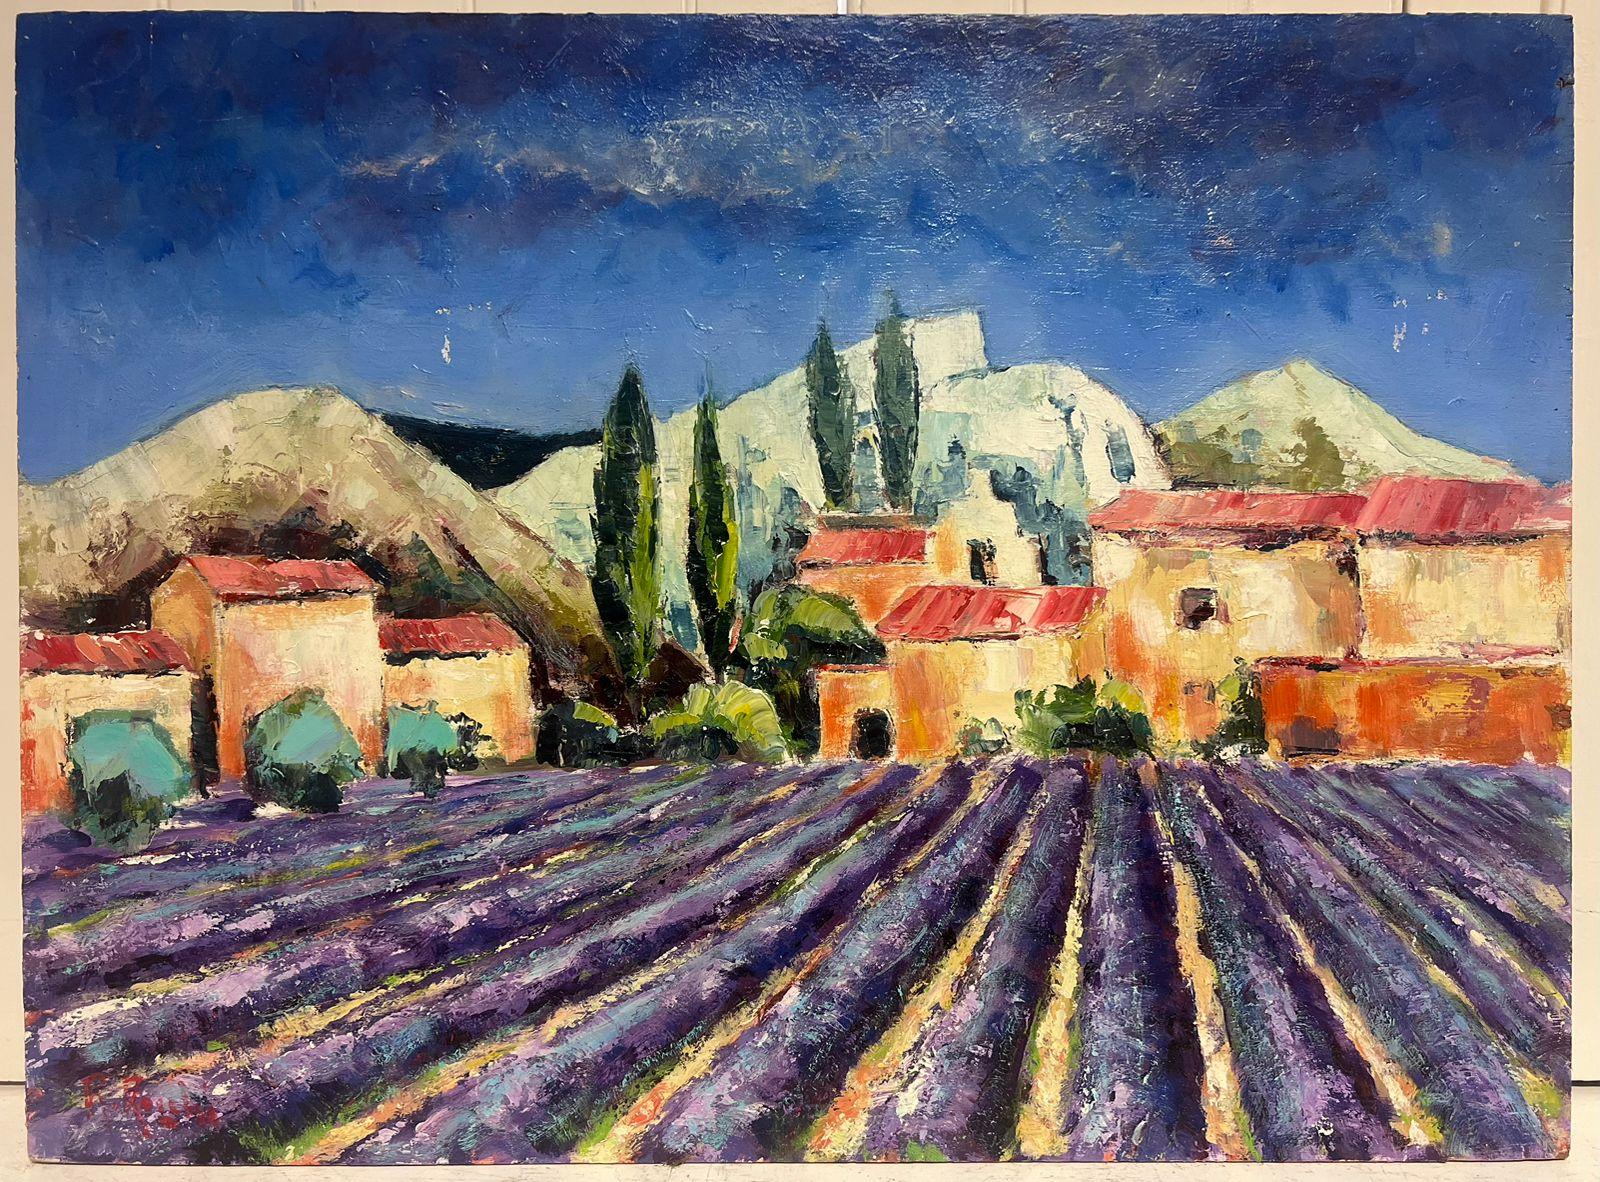 Provence Lavender Fields
French School, second half 20th century
indistinctly signed oil on board, unframed
board: 21.5 x 29 inches
provenance: private collection, France
condition: very good and sound condition, minor surface scuffs. 